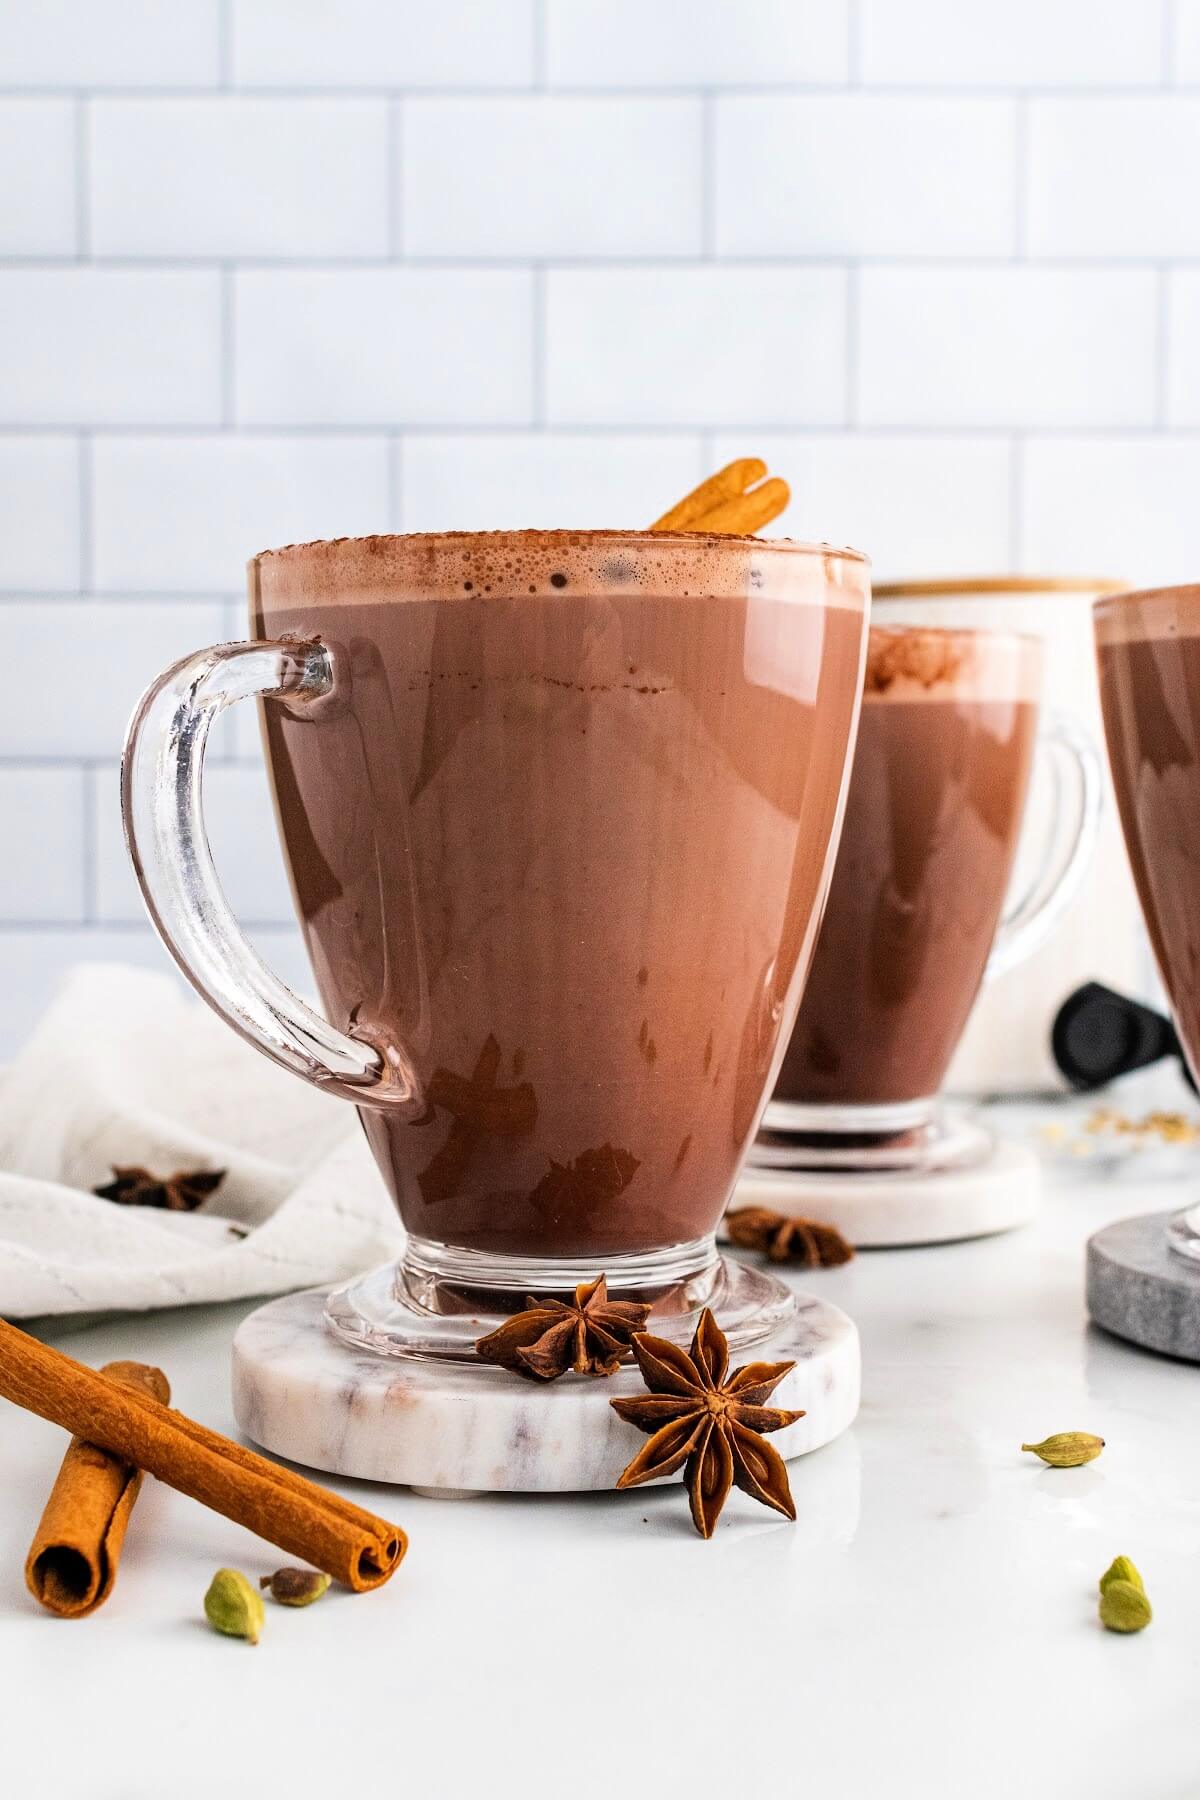 Three glass mugs filled with hot chocolate and garnished with cinnamon sticks and ground cinnamon, sitting on marble coasters with dried star anise pods, cinnamon sticks and cardamom pods sitting around them and a white kitchen towel to the side.